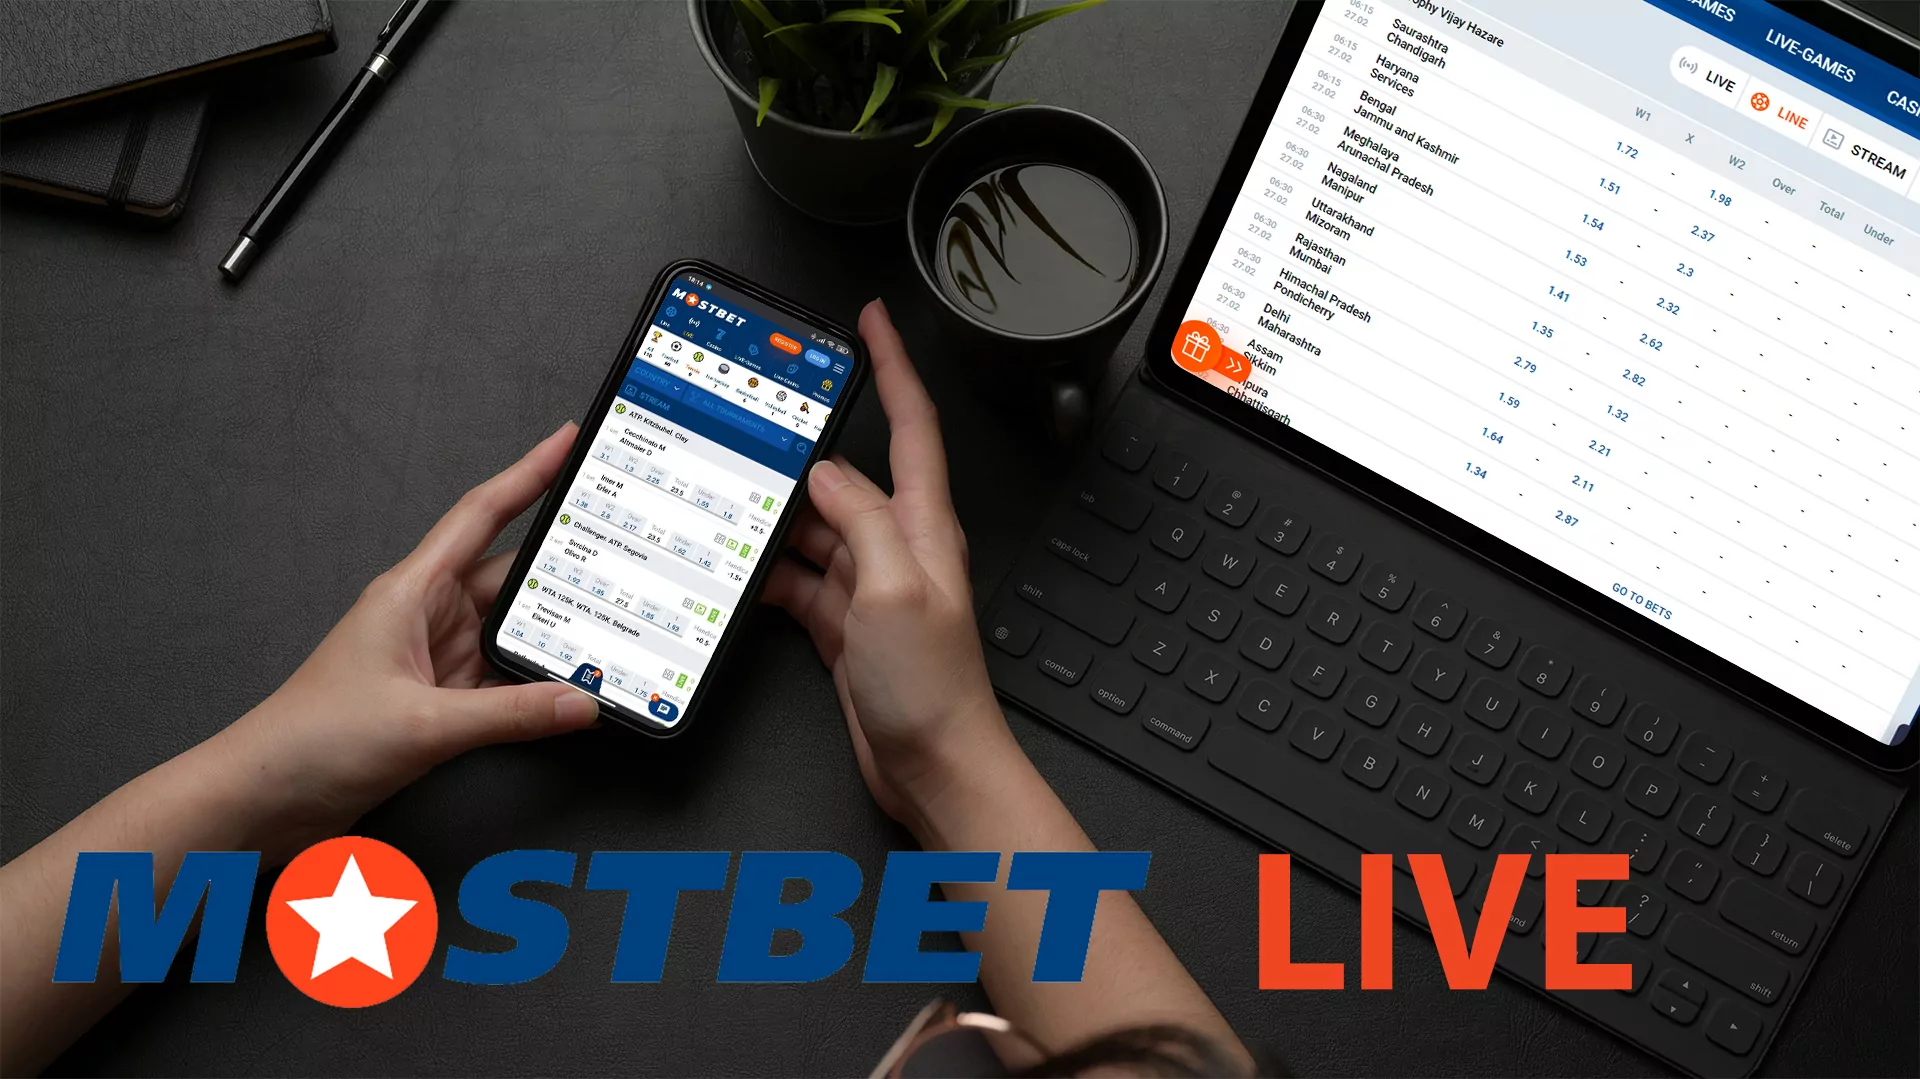 Live betting is also available in the Mostbet application.